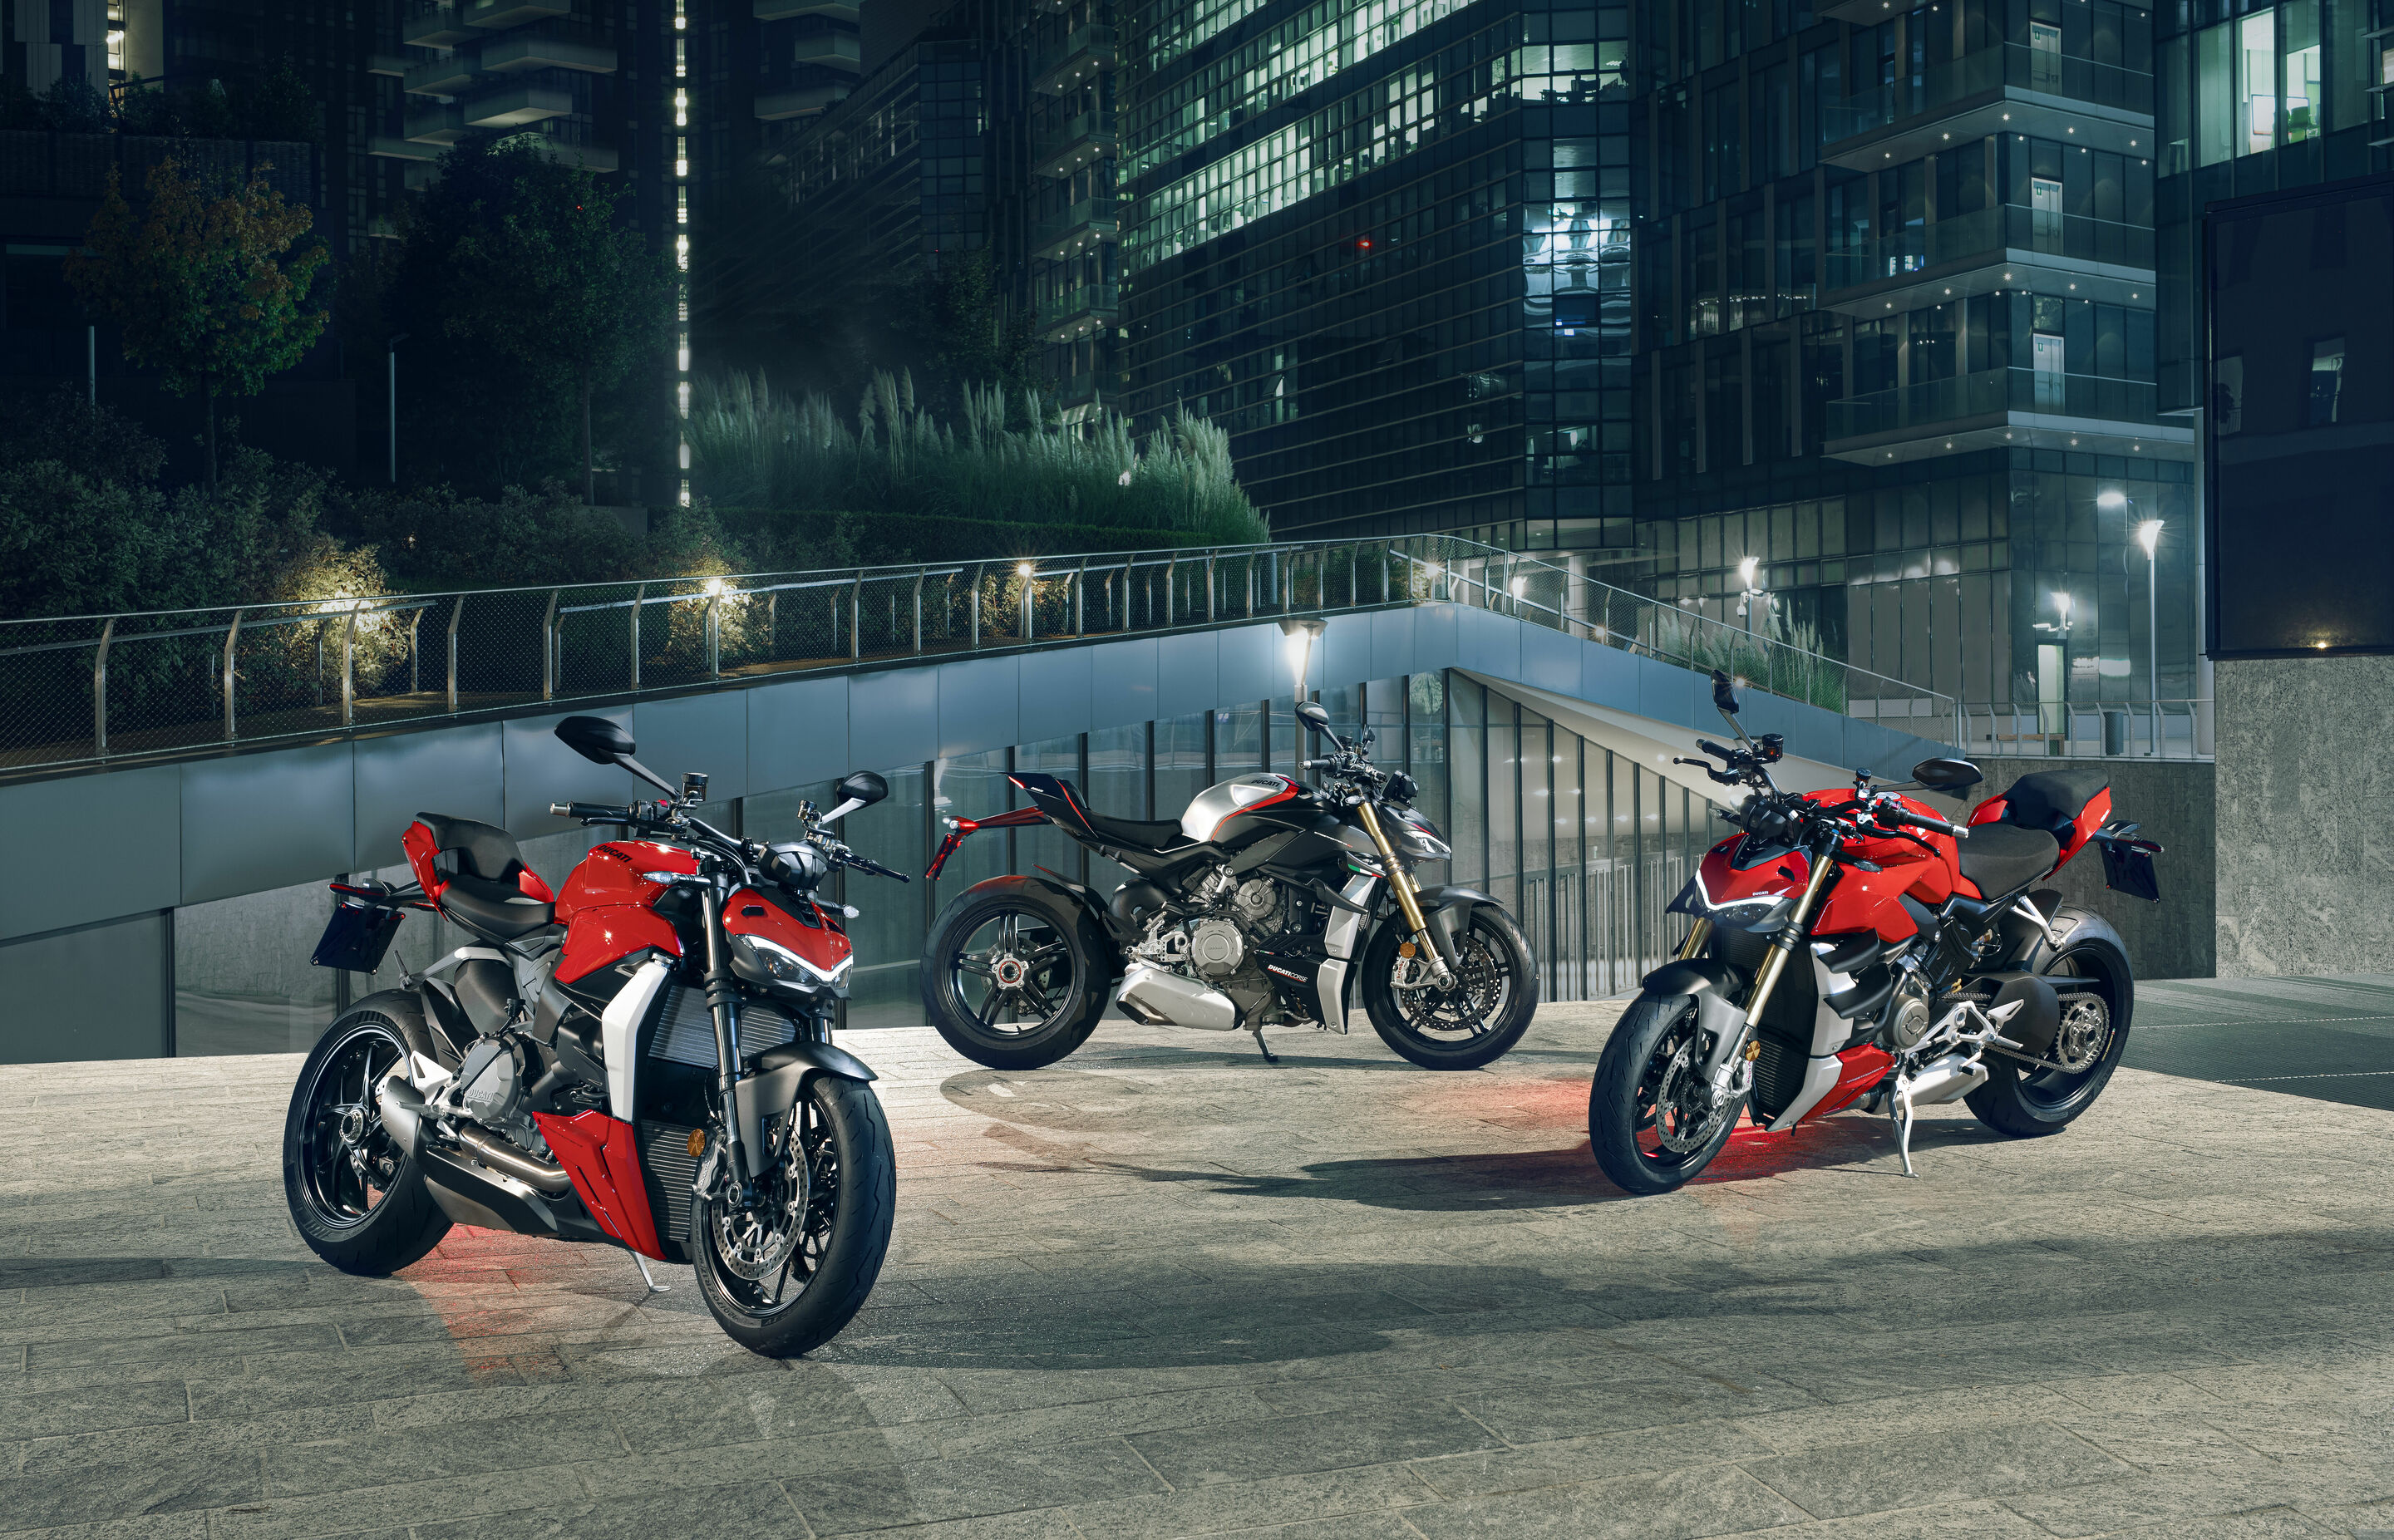 The passion for Ducati has never been greater. With 59,447 motorcycles sold worldwide, 2021 was the best year ever